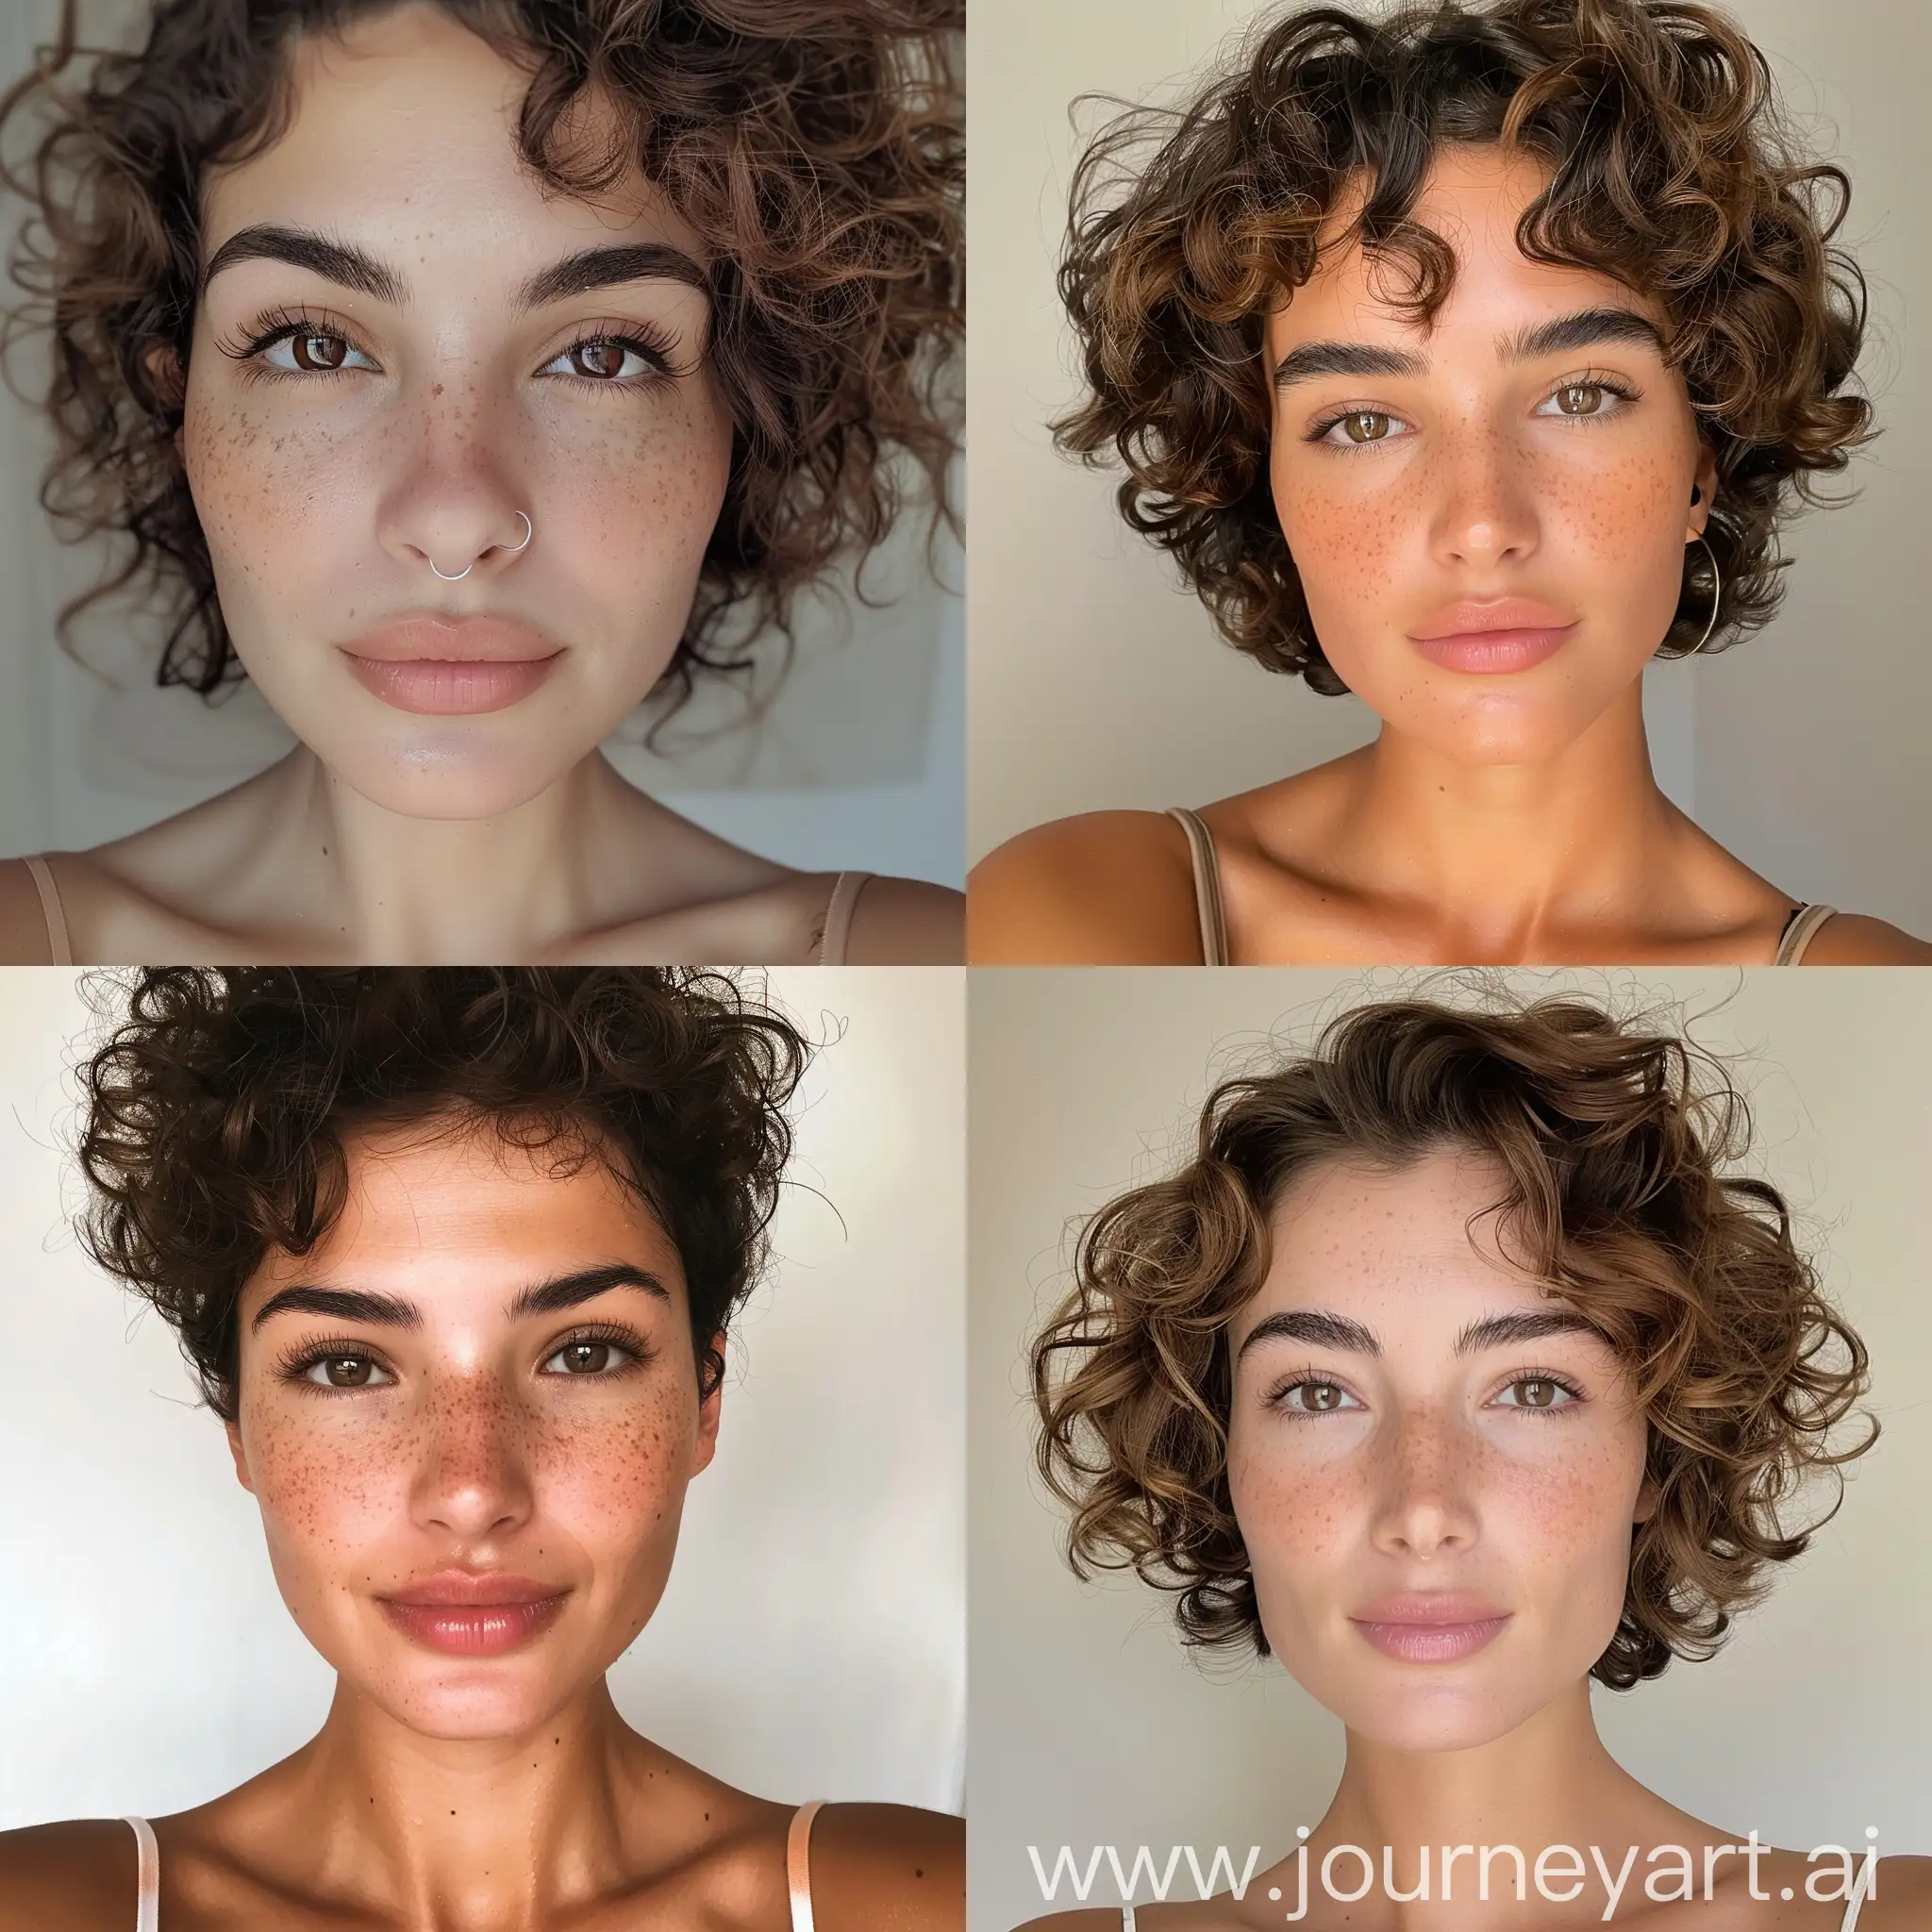 Stylish-SpanishAmerican-Instagram-Model-with-Curly-Brown-Hair